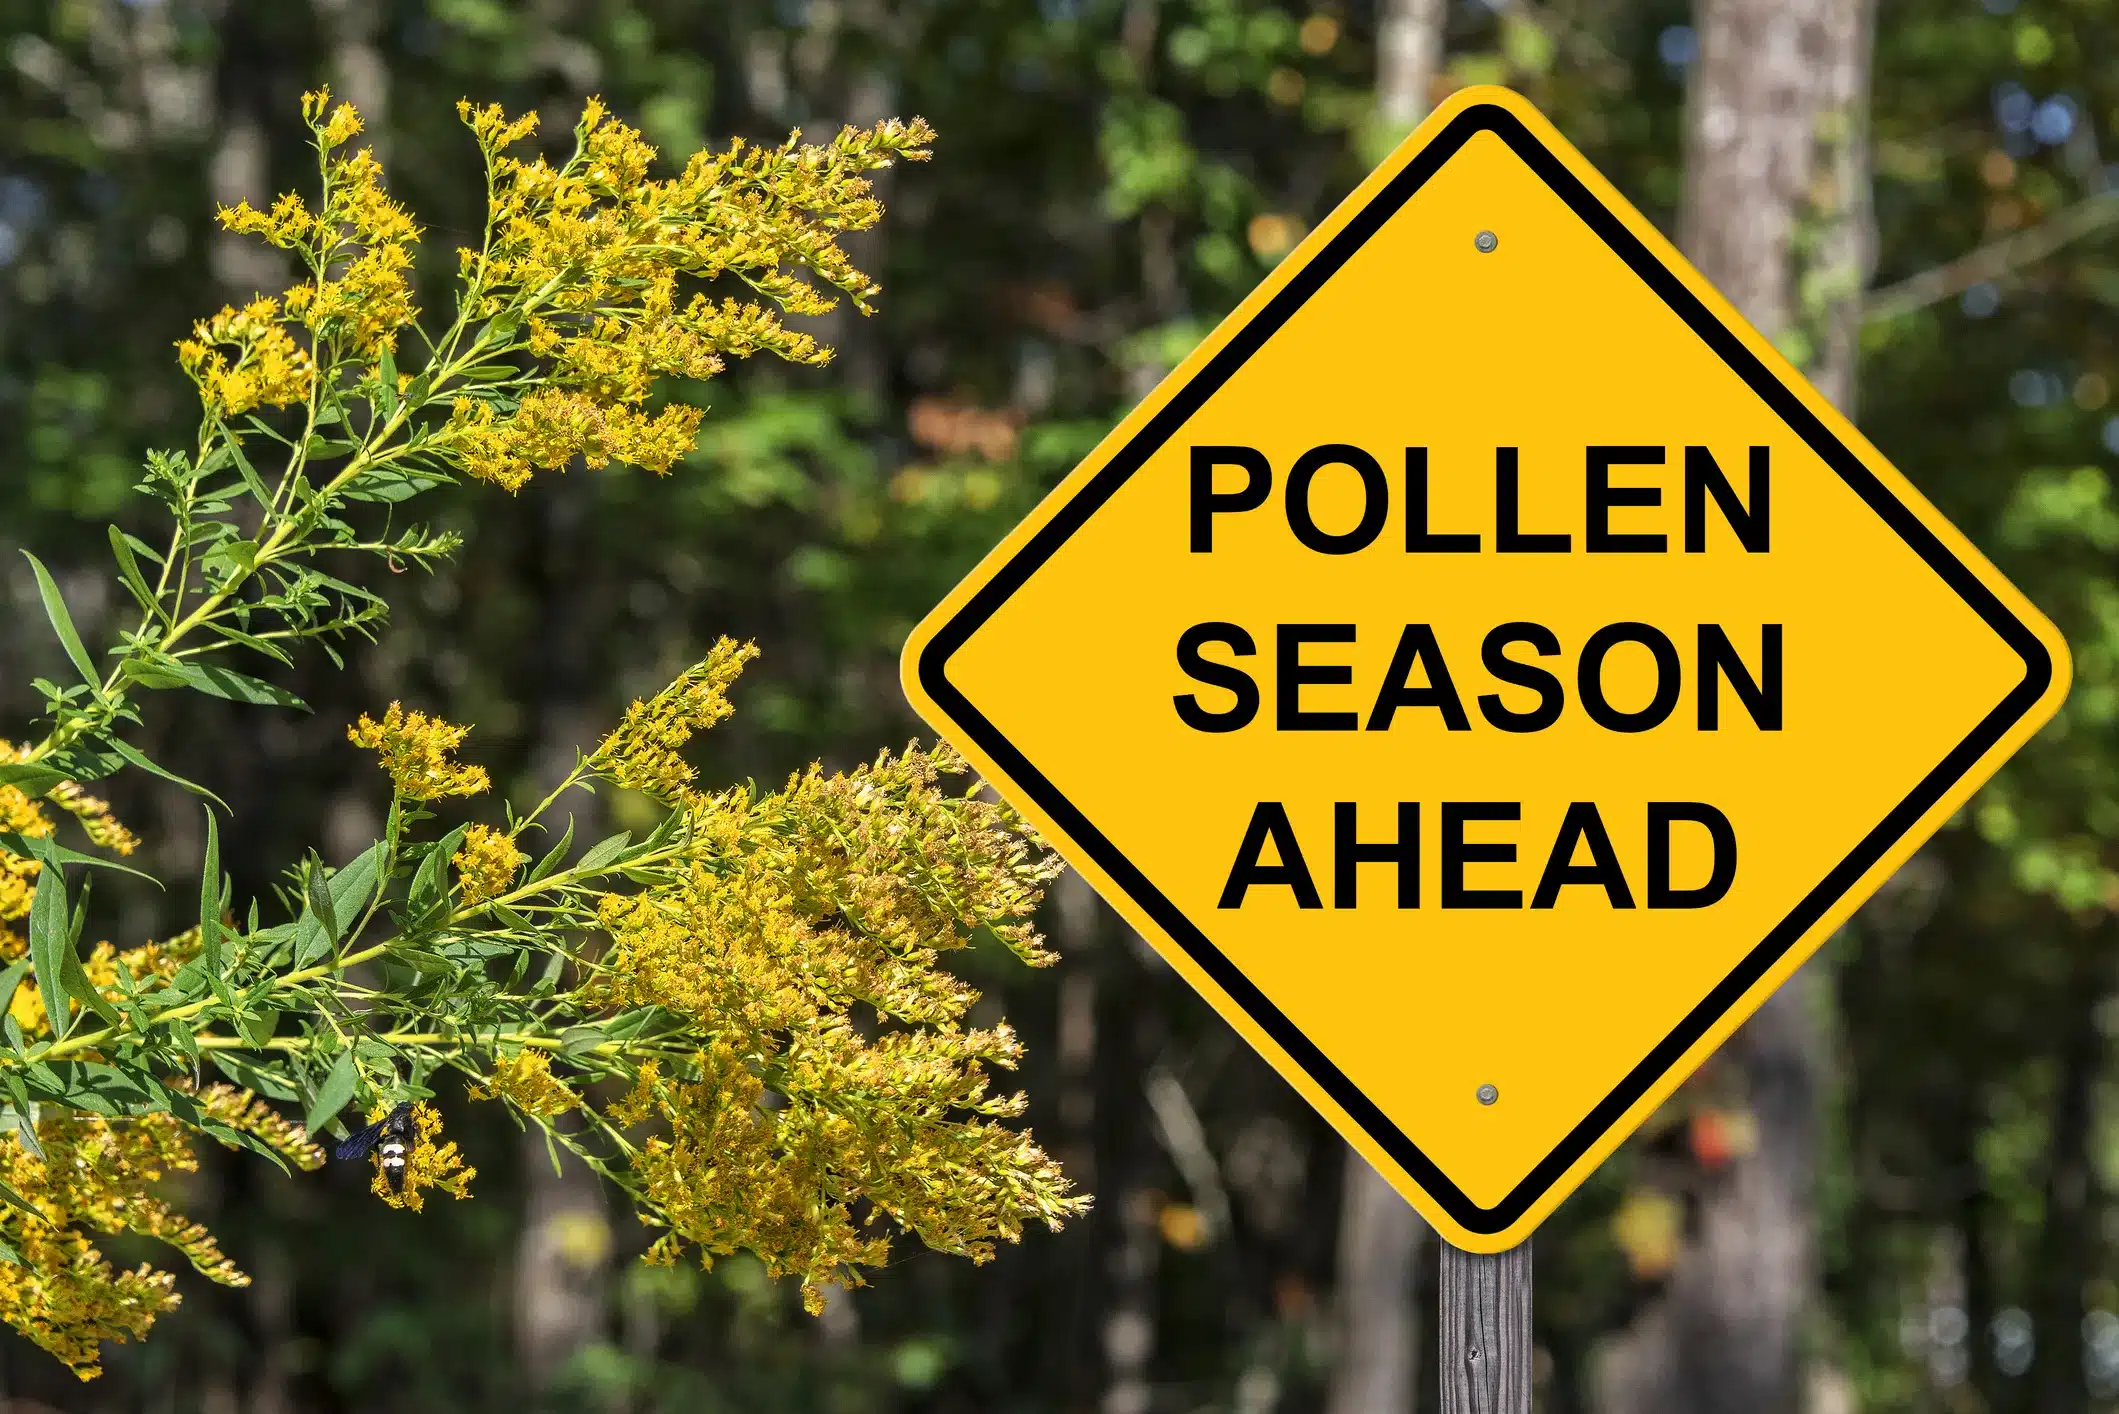 Caution sign reading "Pollen Season Ahead" surrounded by trees and flowering branches